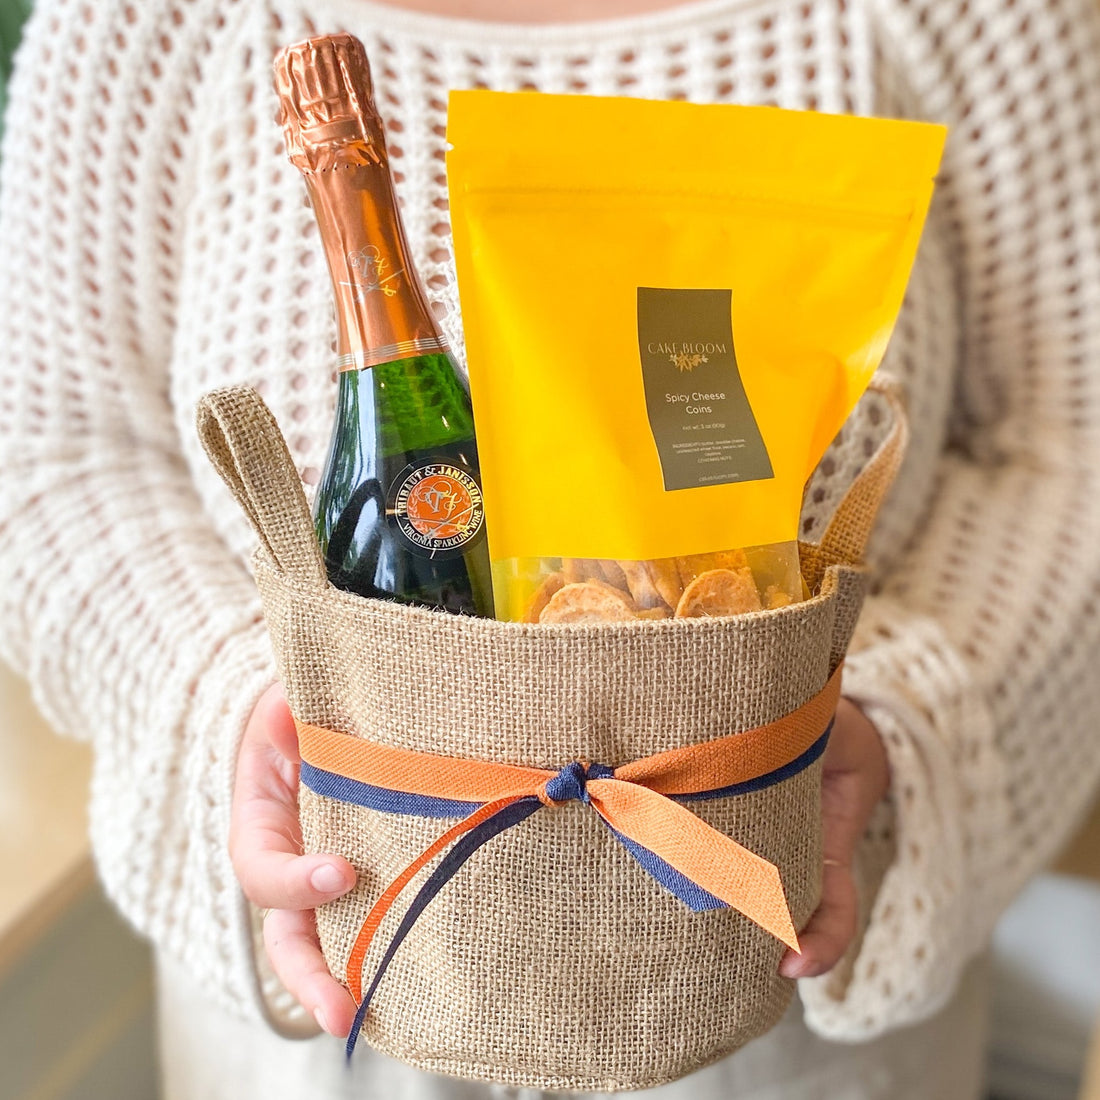 A person holding a small burlap tote containing a bottle of Thibaut-Janisson wine and a bag of spicy cheese coins. The tote is tied with orange and blue ribbon.